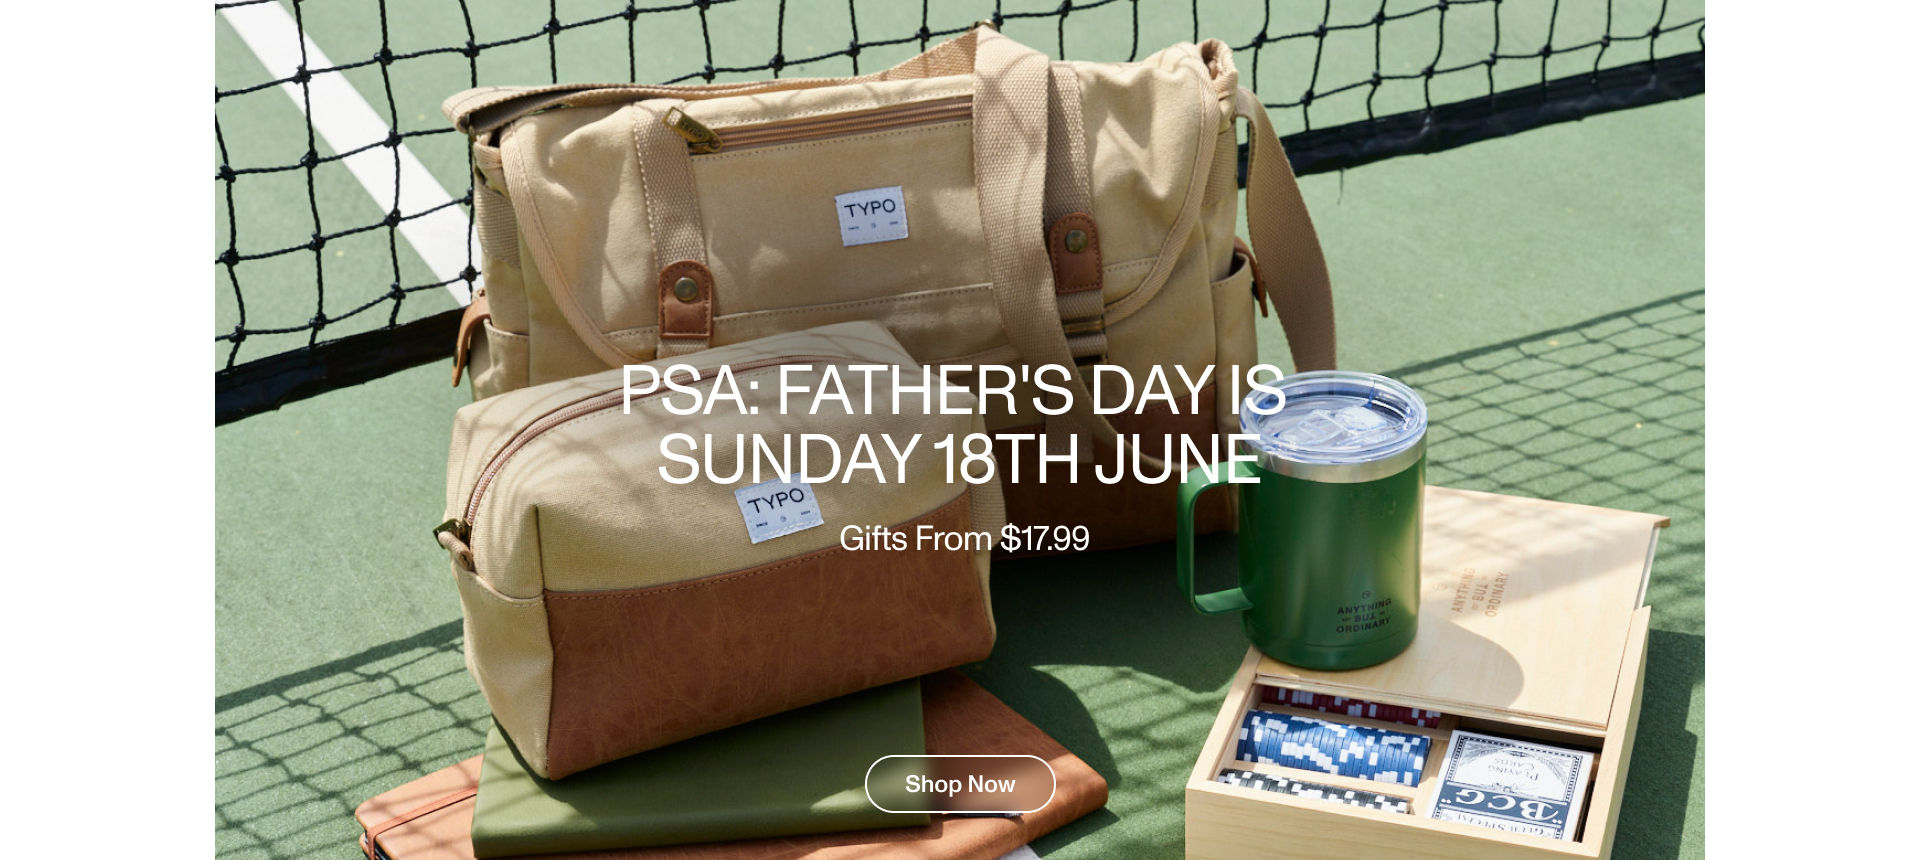 PSA: Father's Day Is Sunday 18th June. Gifts From $17.99. Shop Now.